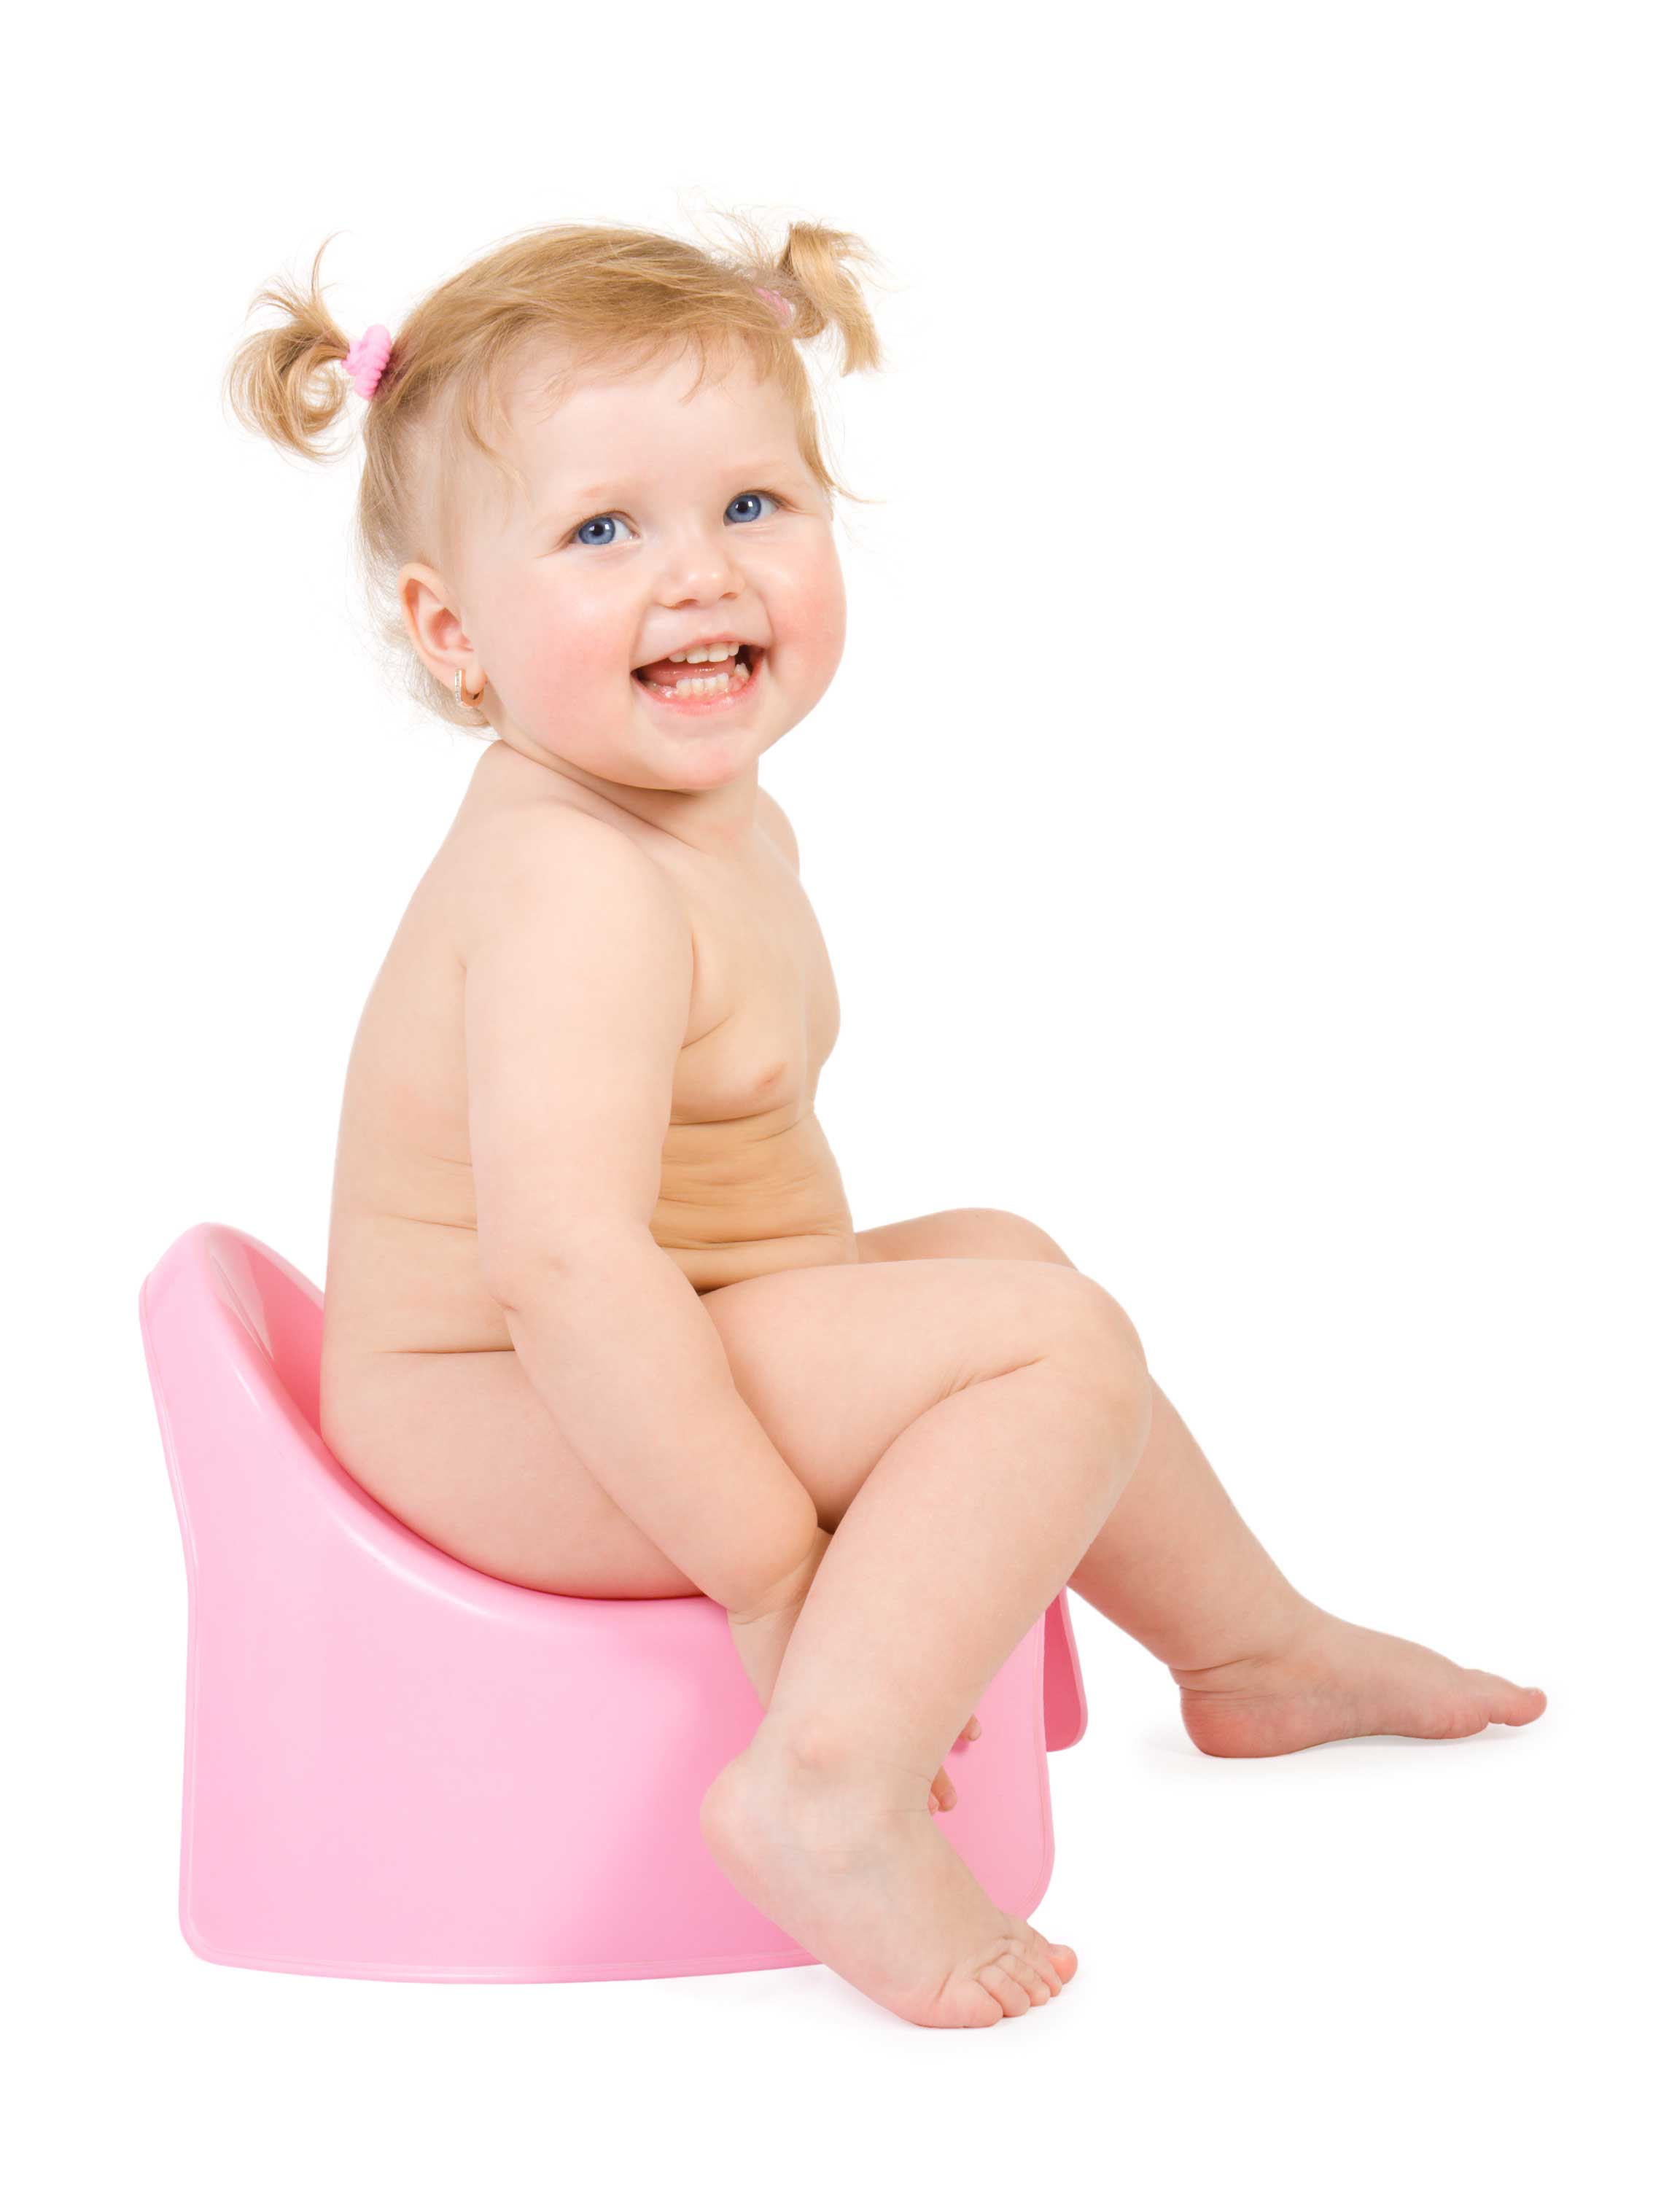 Constipation - find out how to get your kids to use the bathroom, with food and other sure methods. 